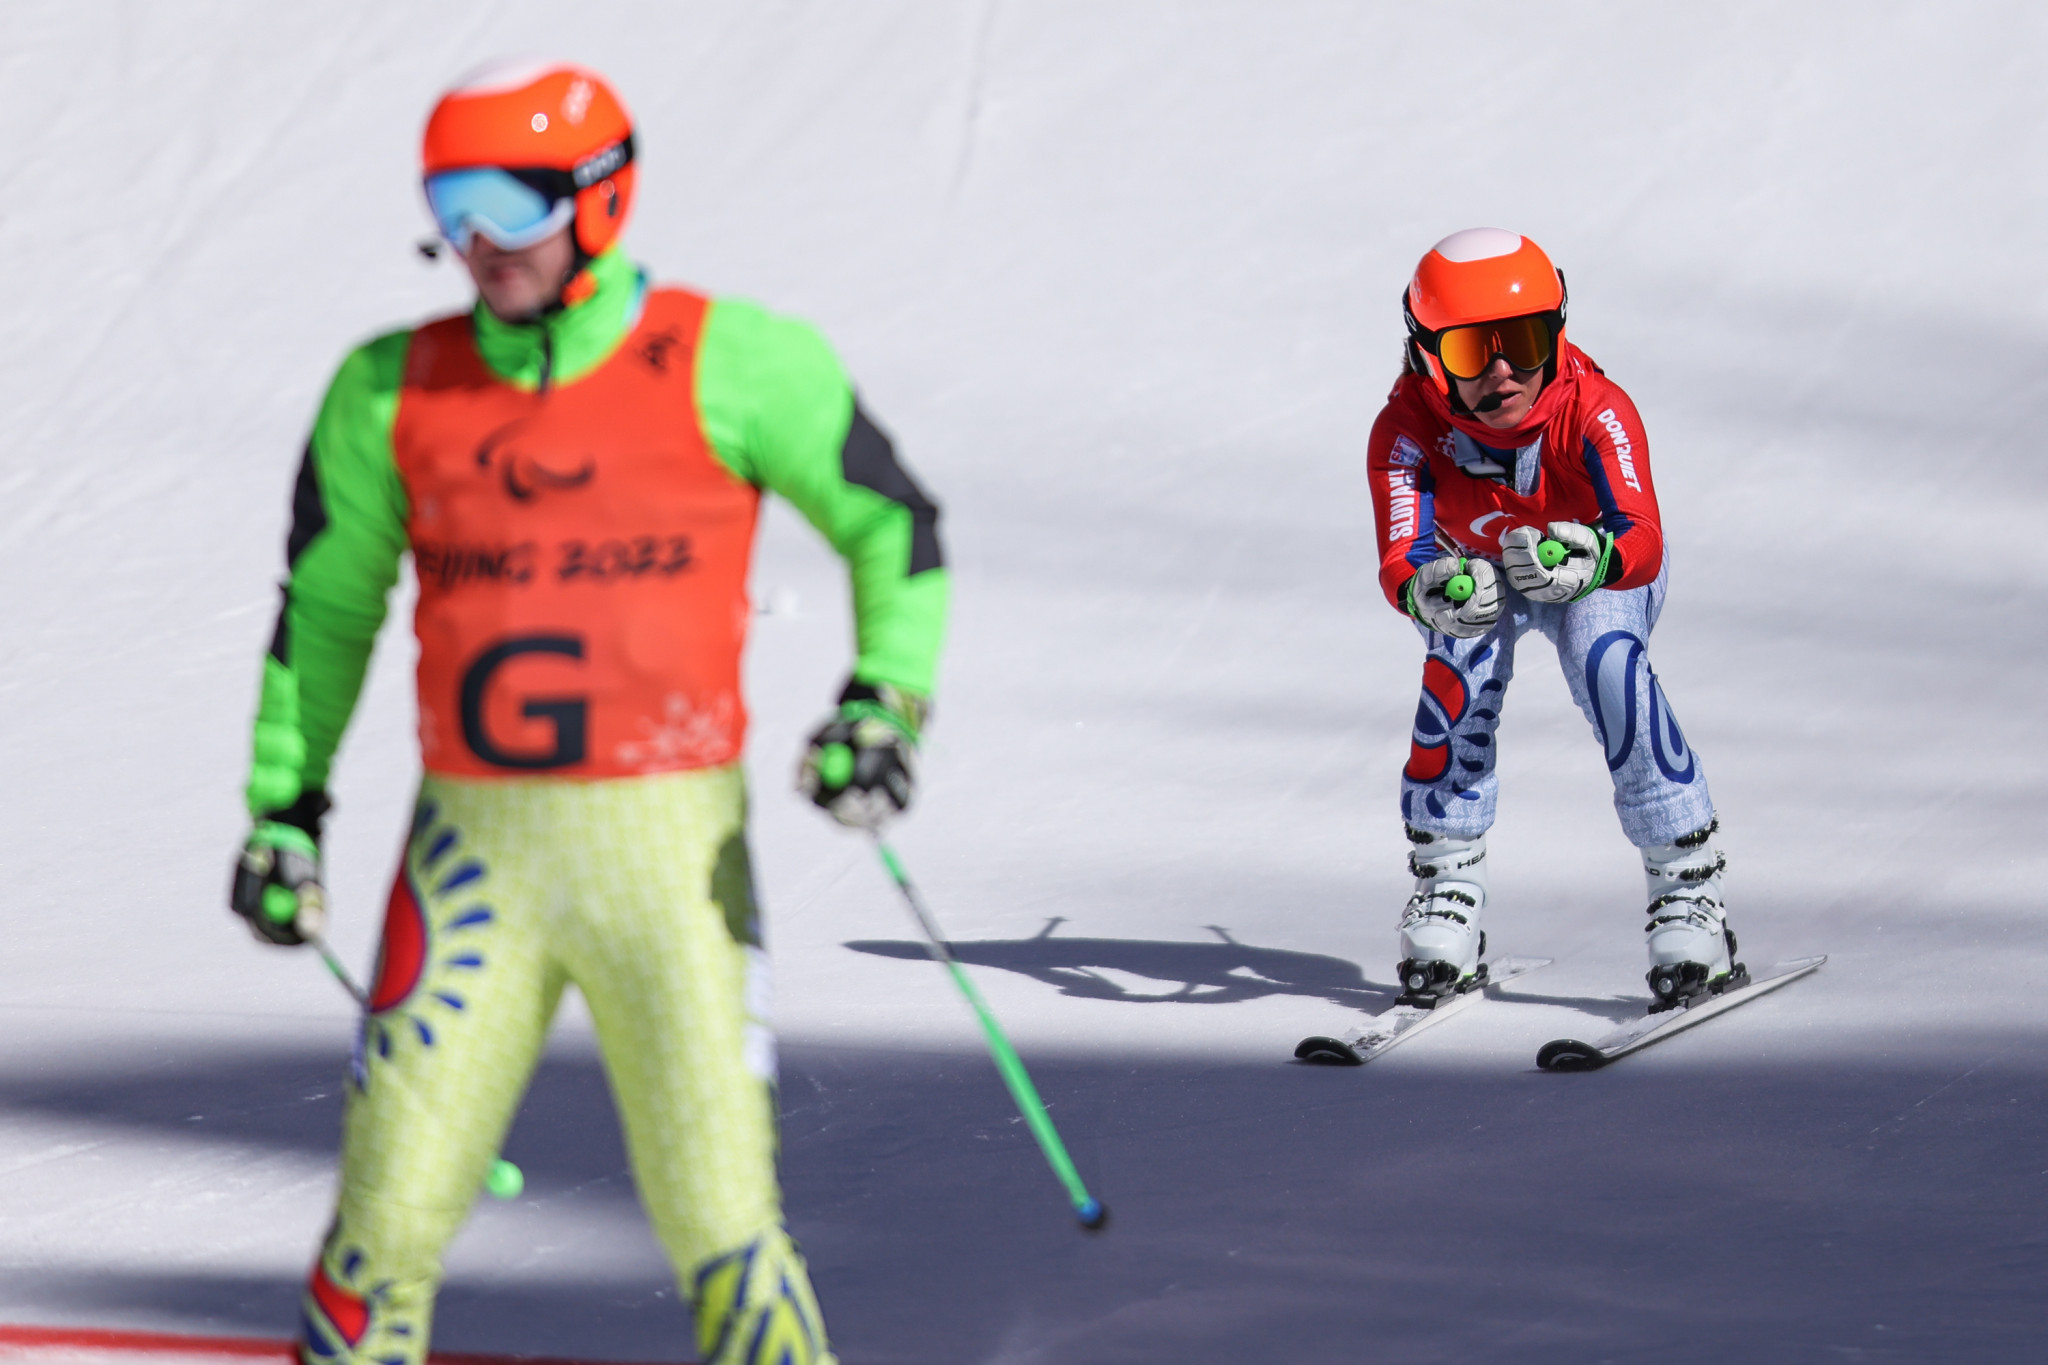 Henrieta Farkasova, skiing behind her guide, will look for a third visually impaired downhill title ©Getty Images